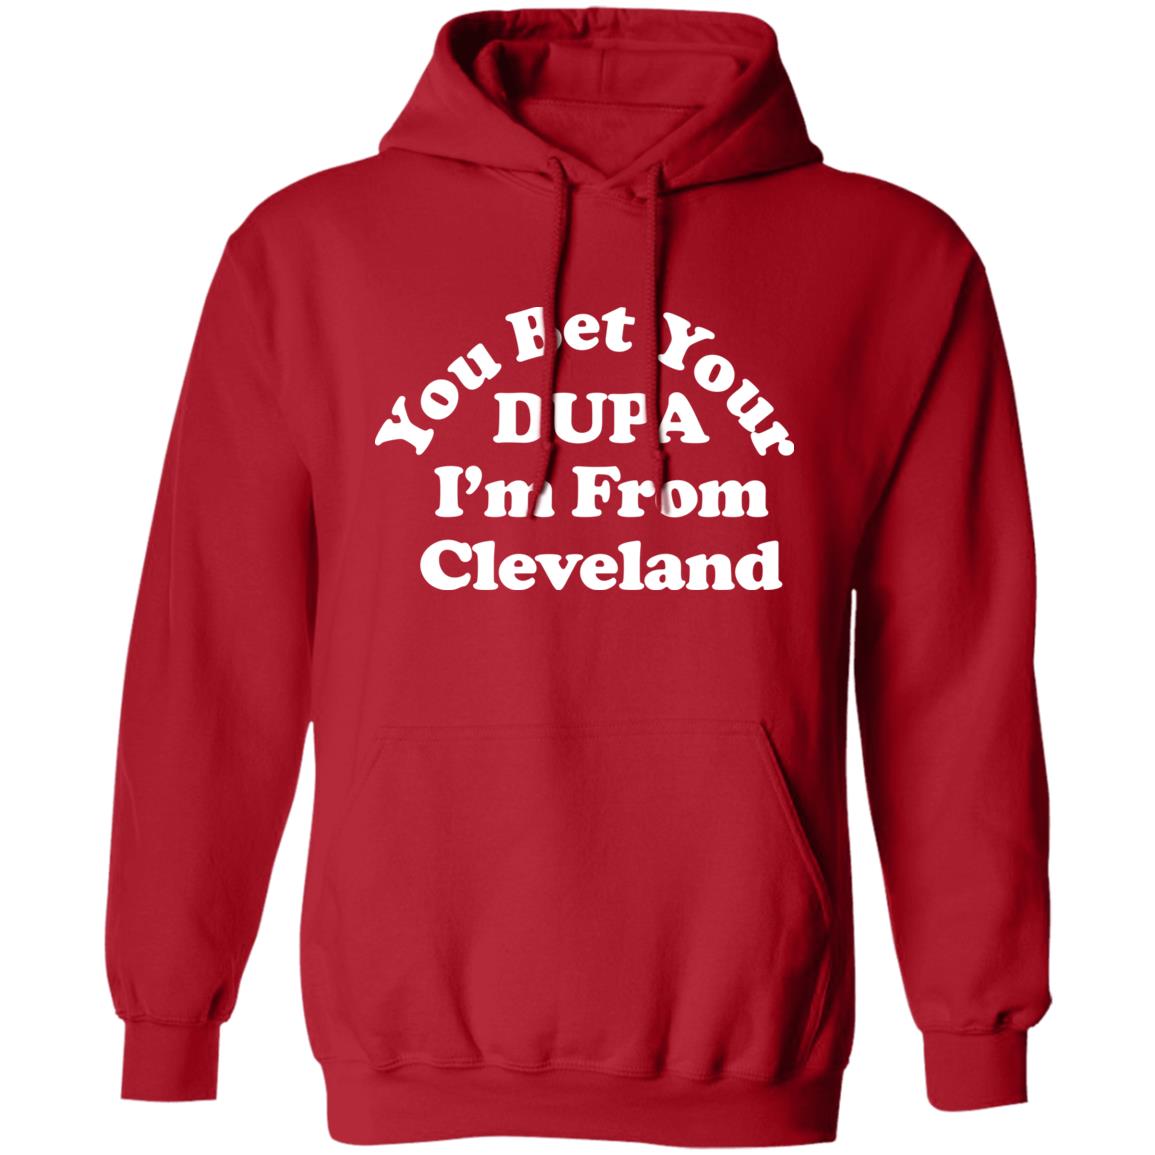 You Bet Your Dupa I’m From Cleveland Shirt 12